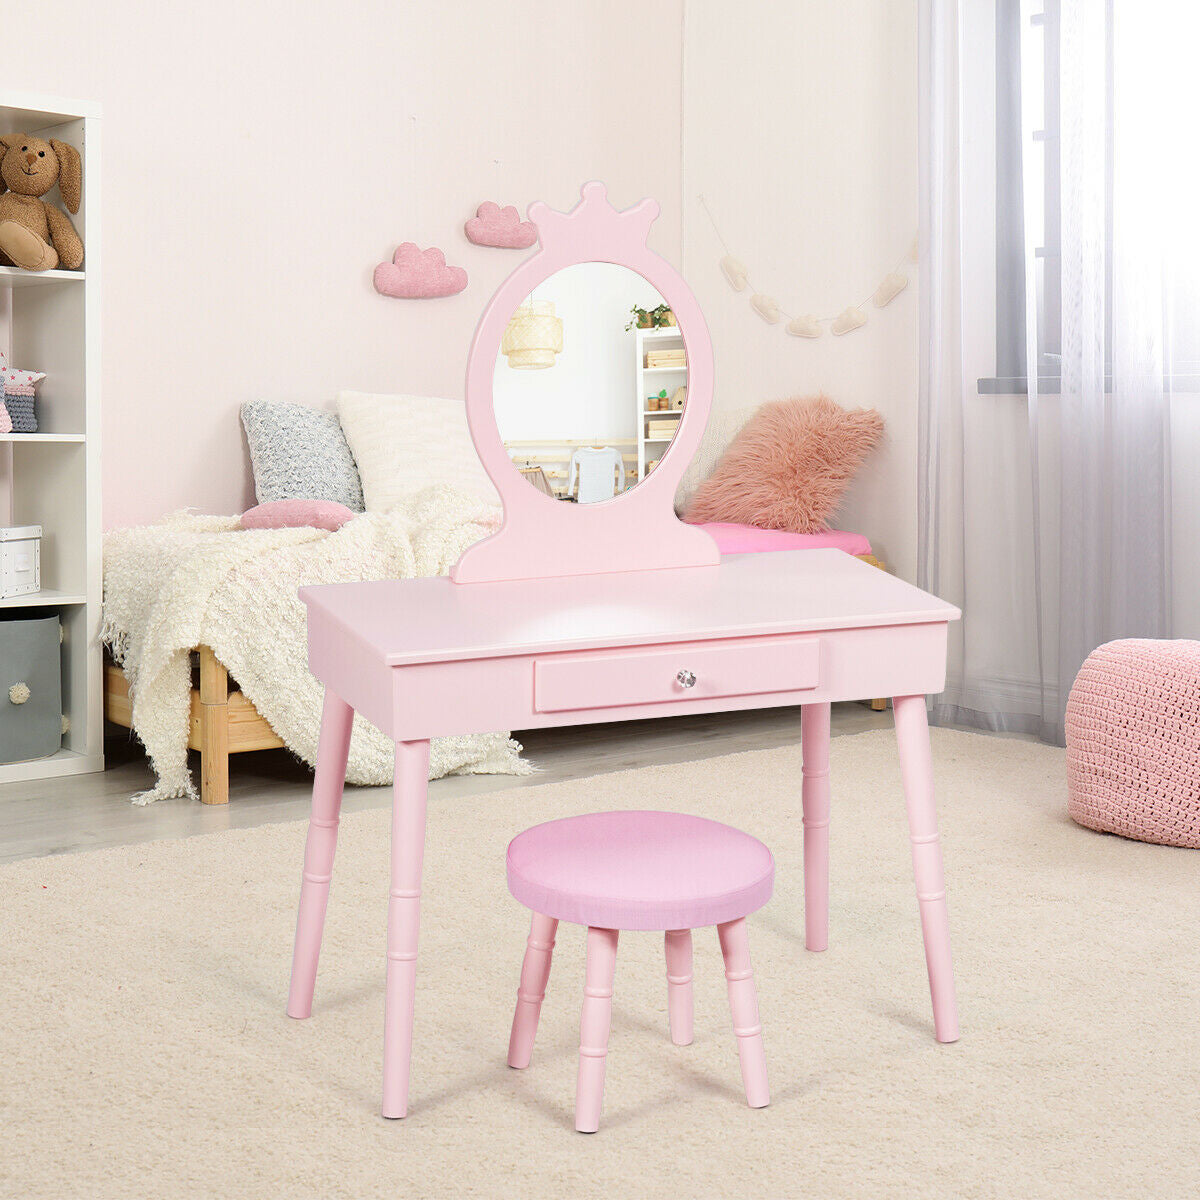 Kids Vanity Set with Stool and Real Mirror: This kids' vanity set showcases a classic design with a charming appearance. The gracefully designed stool offers luxurious comfort with its soft sponge padding. The mirror provides clear reflections, allowing little girls to pretend to do makeup like their moms, making this vanity set truly adorable.